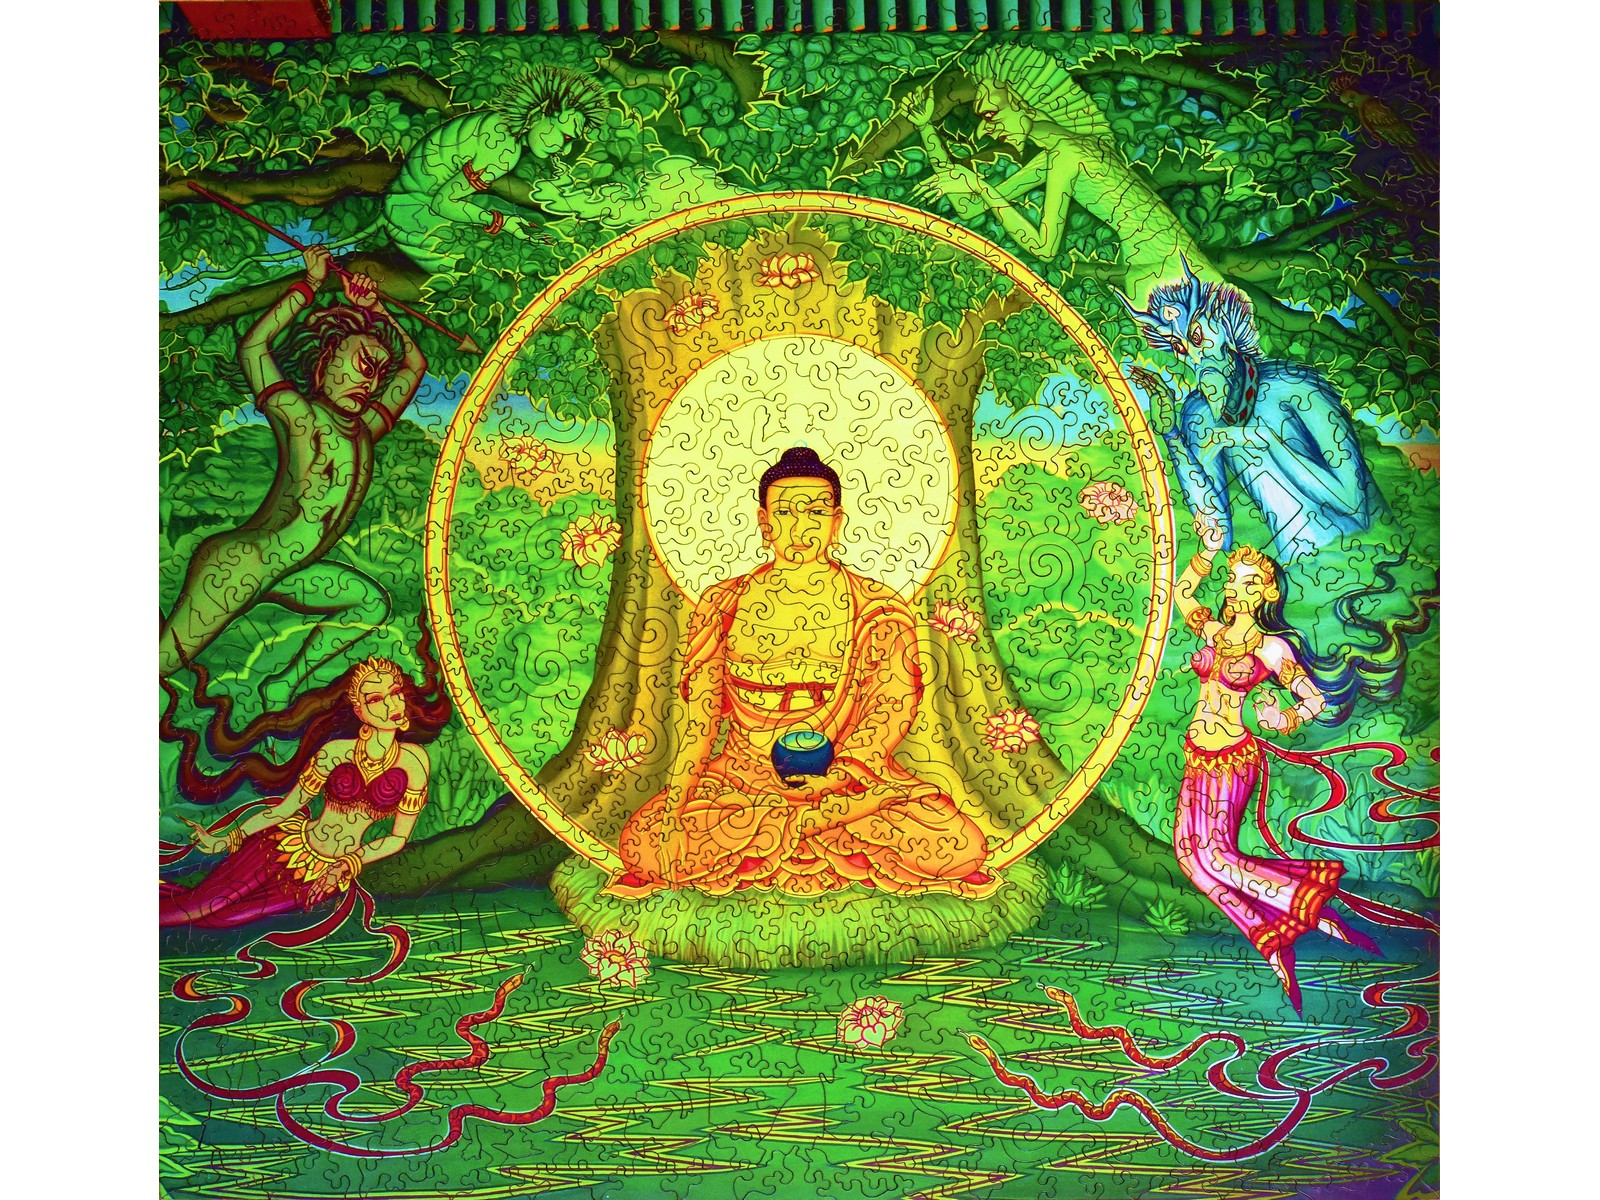 The front of the puzzle, Buddha, which shows the Buddha meditating under a tree.